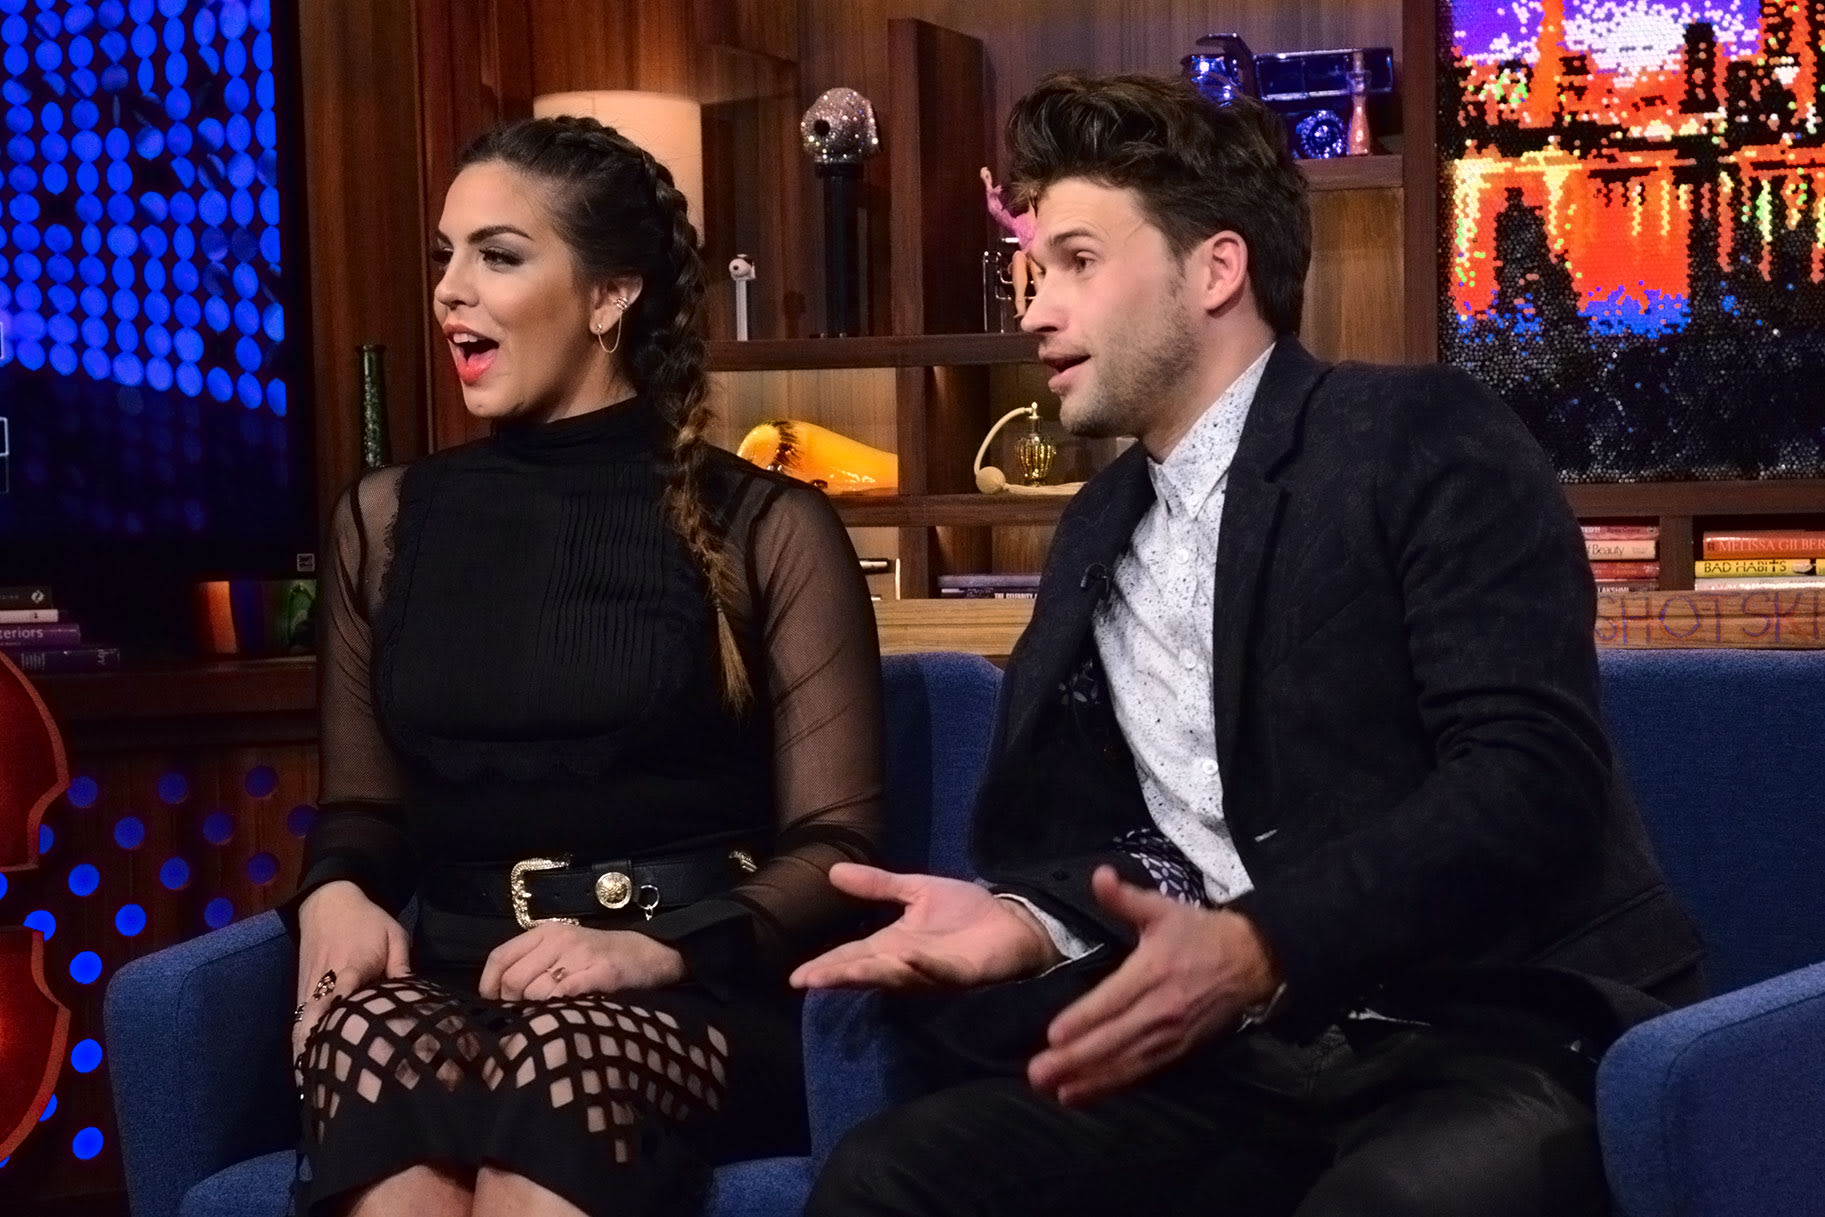 Did a WWHL Caller Predict Katie and Schwartz's Issues Back in 2016? (Watch the Vintage Clip) | Bravo TV Official Site